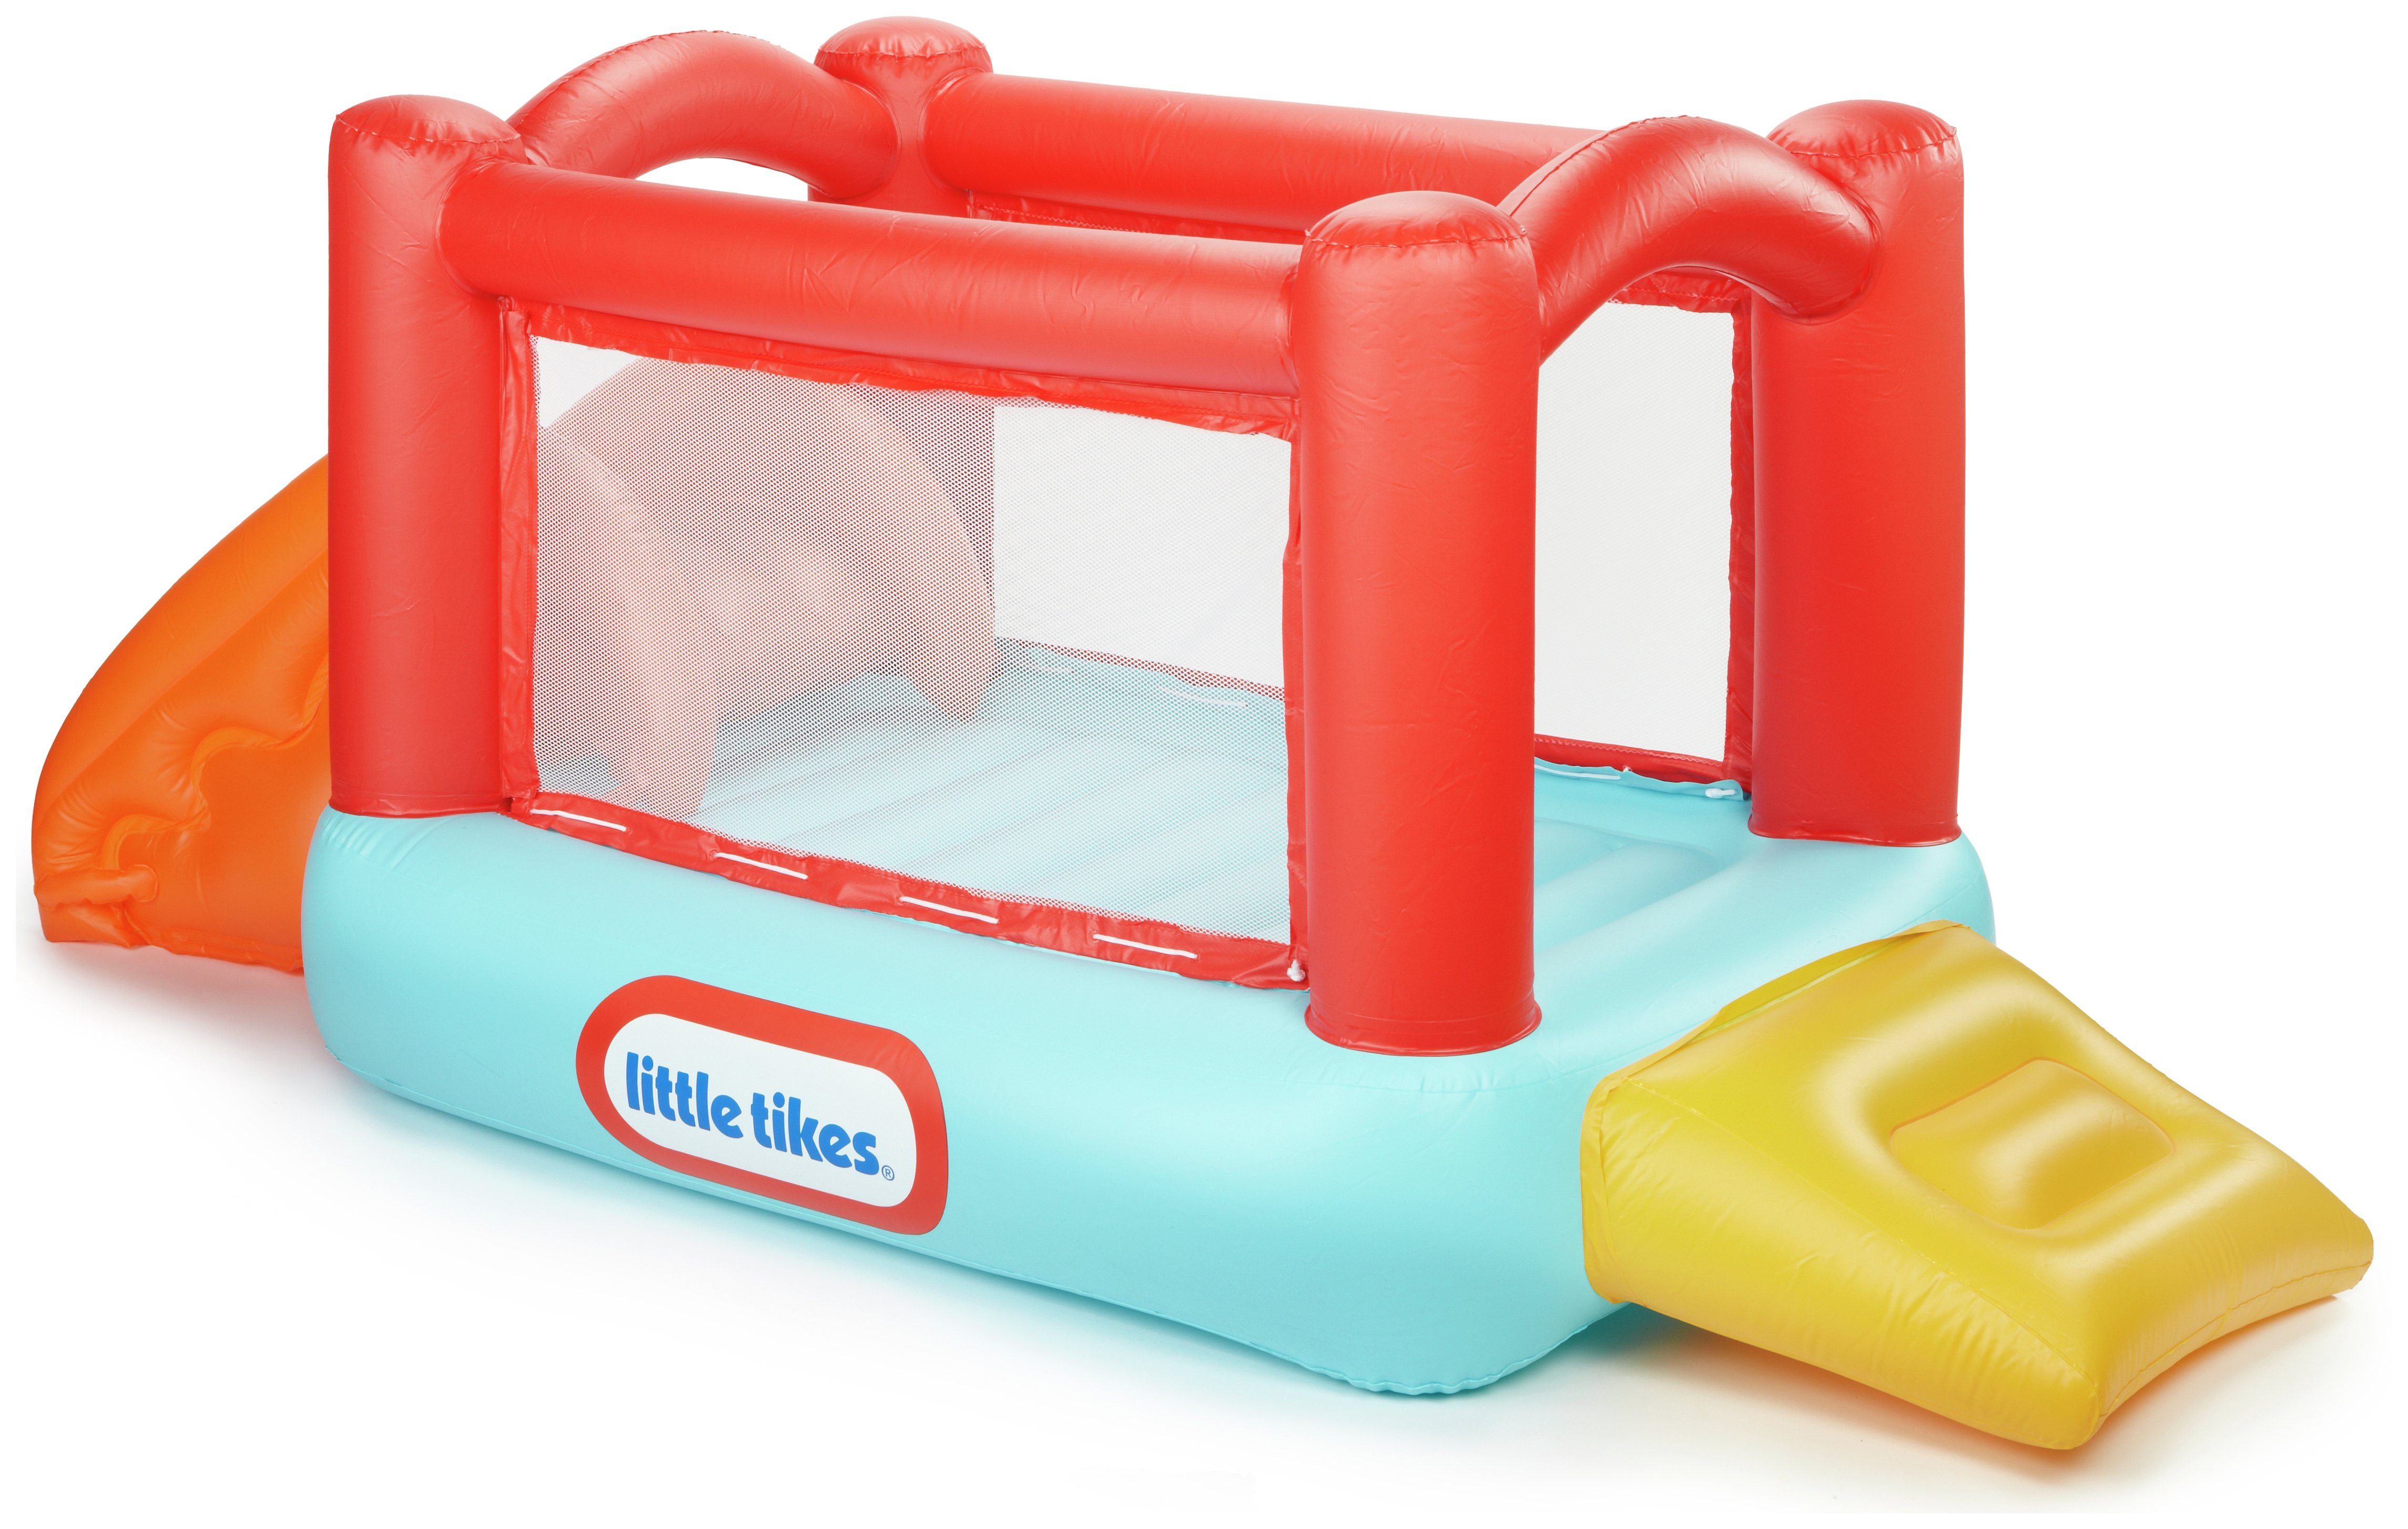 little tikes products